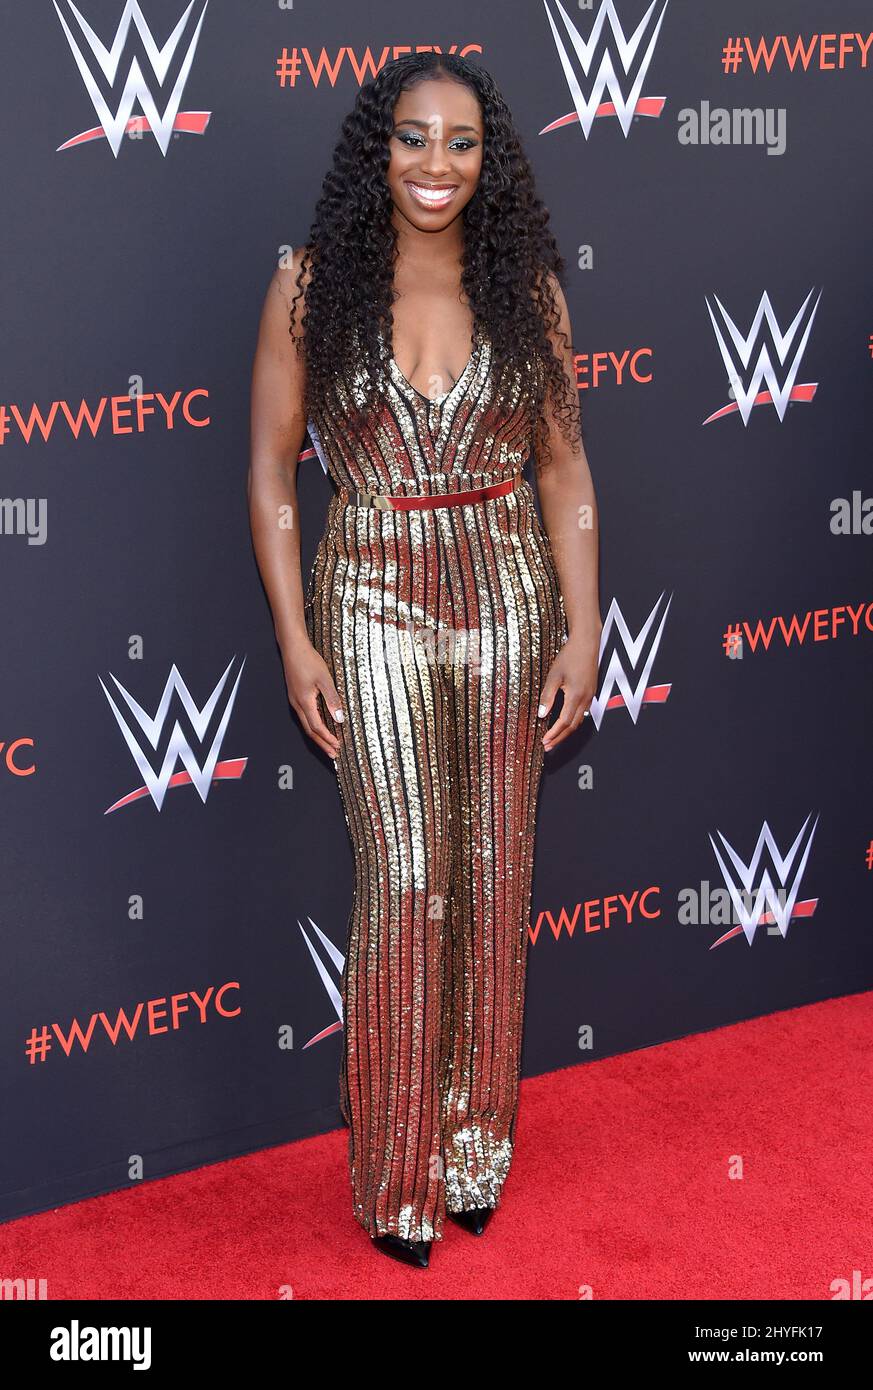 Naomi at the 'WWE' FYC Event event at TV Academy Saban Media Center on June 6, 2018 in North Hollywood, CA. Stock Photo